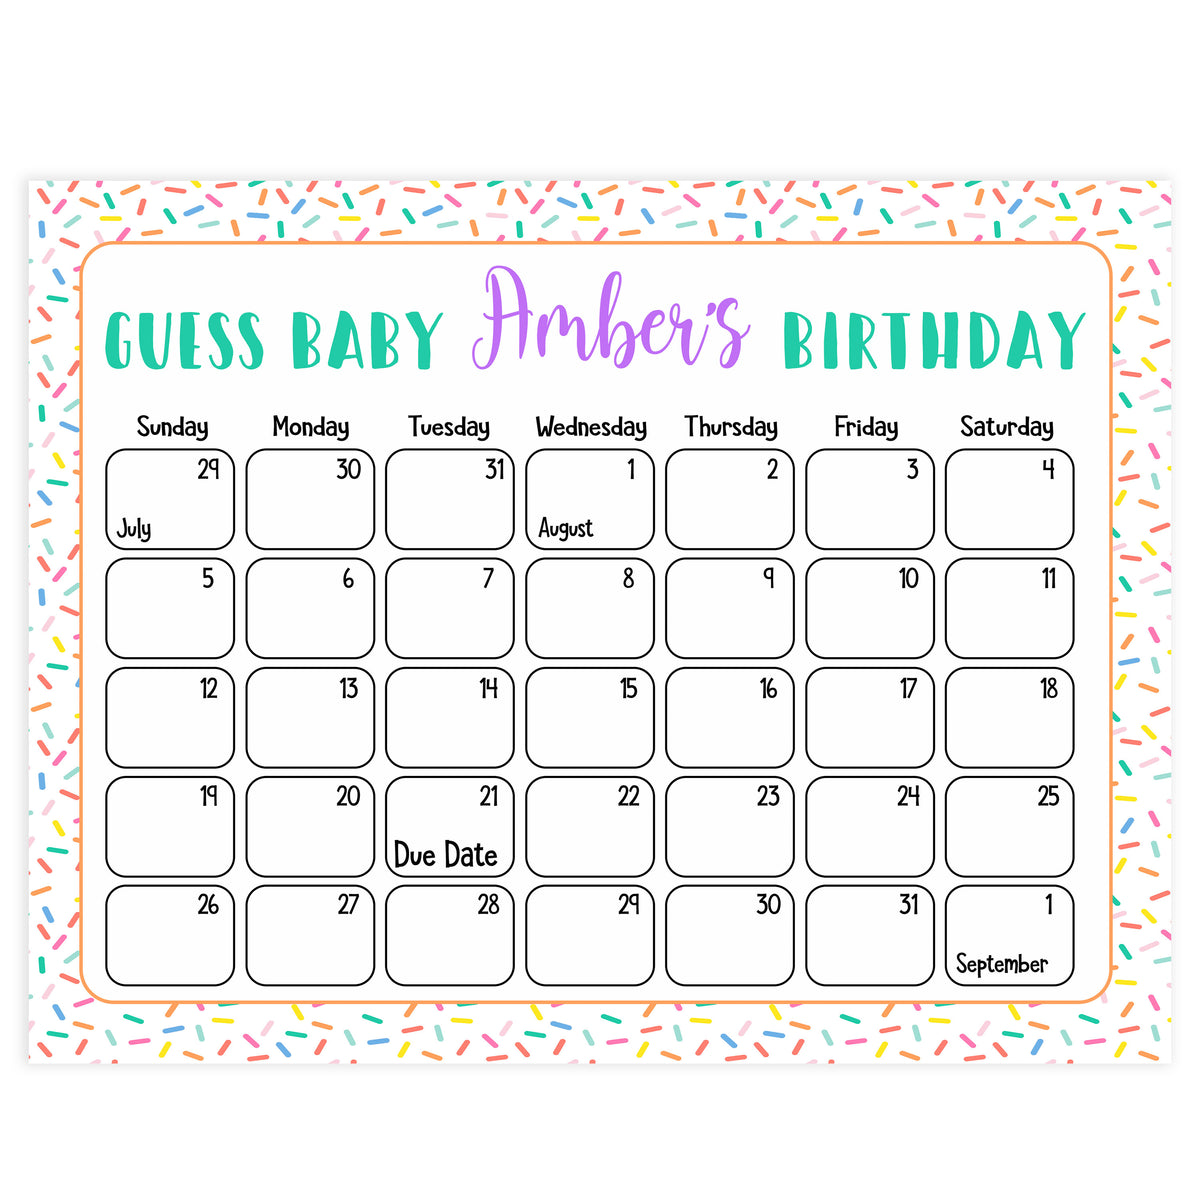 guess the baby birthday game, baby birthday predictions games, printable baby shower games, fun baby shower ideas, baby sprinkle game ideas